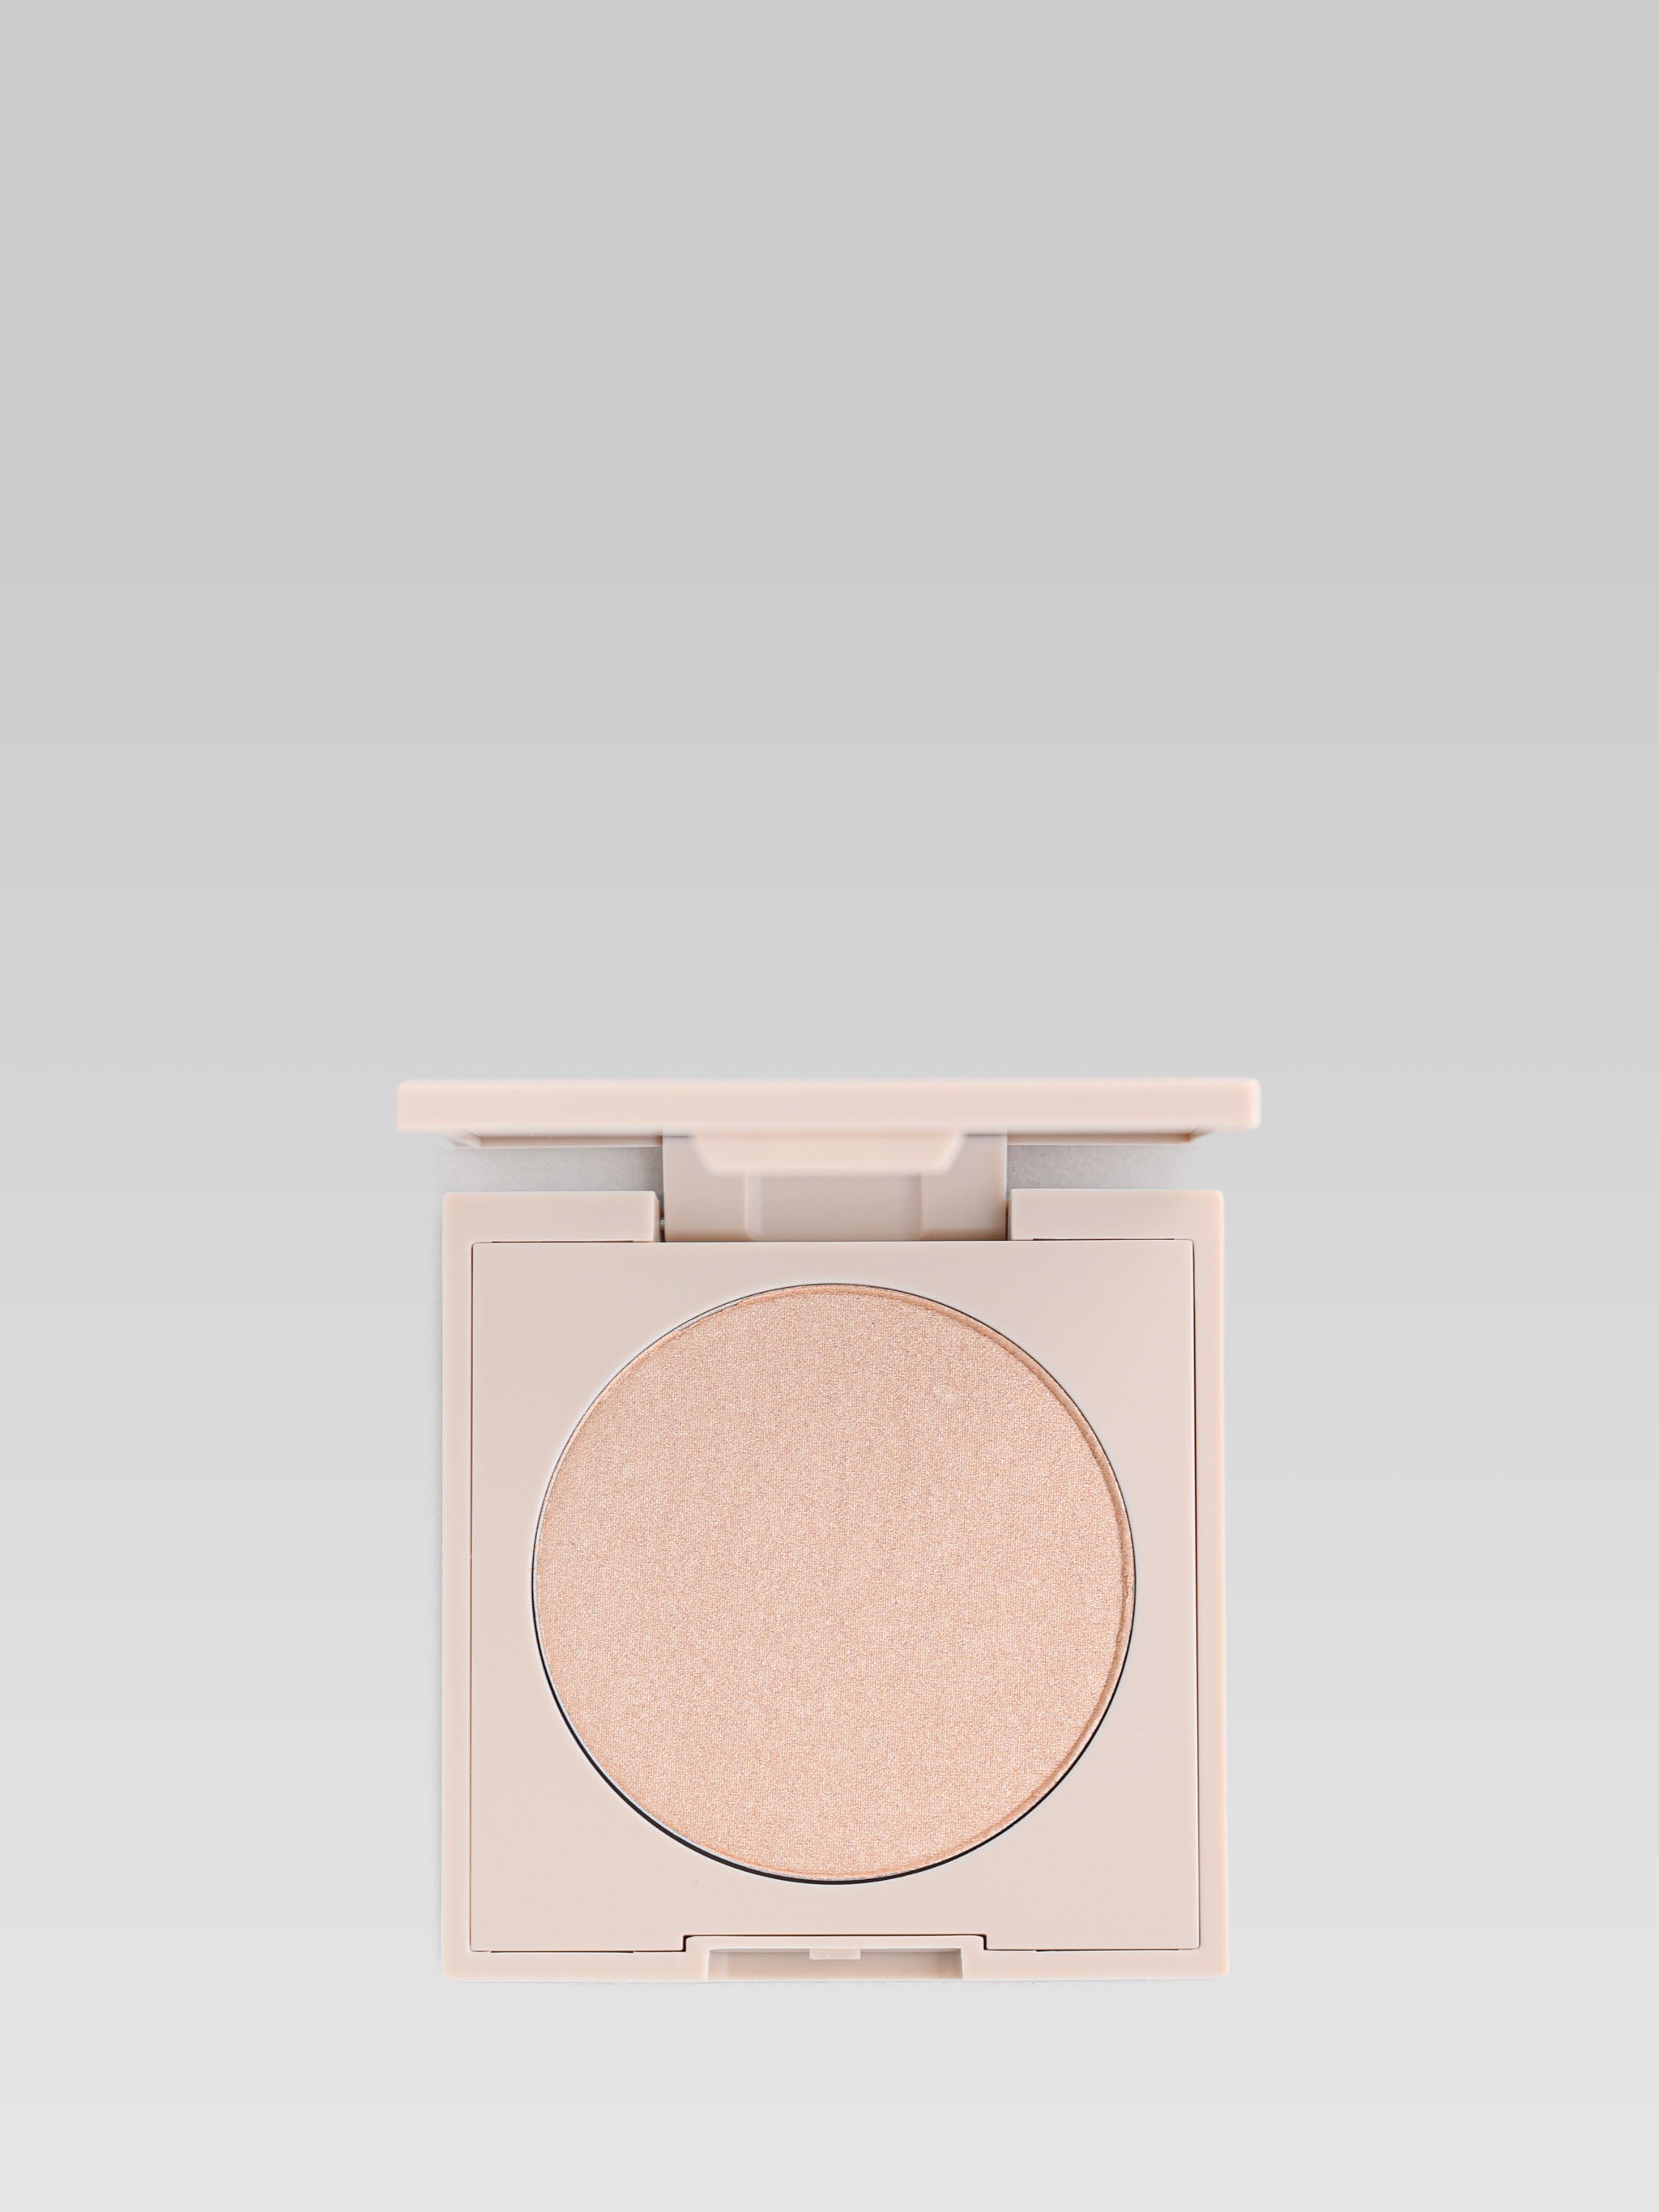 ILIA BEAUTY Day Lite Highlighting Powder in color Decades product shot